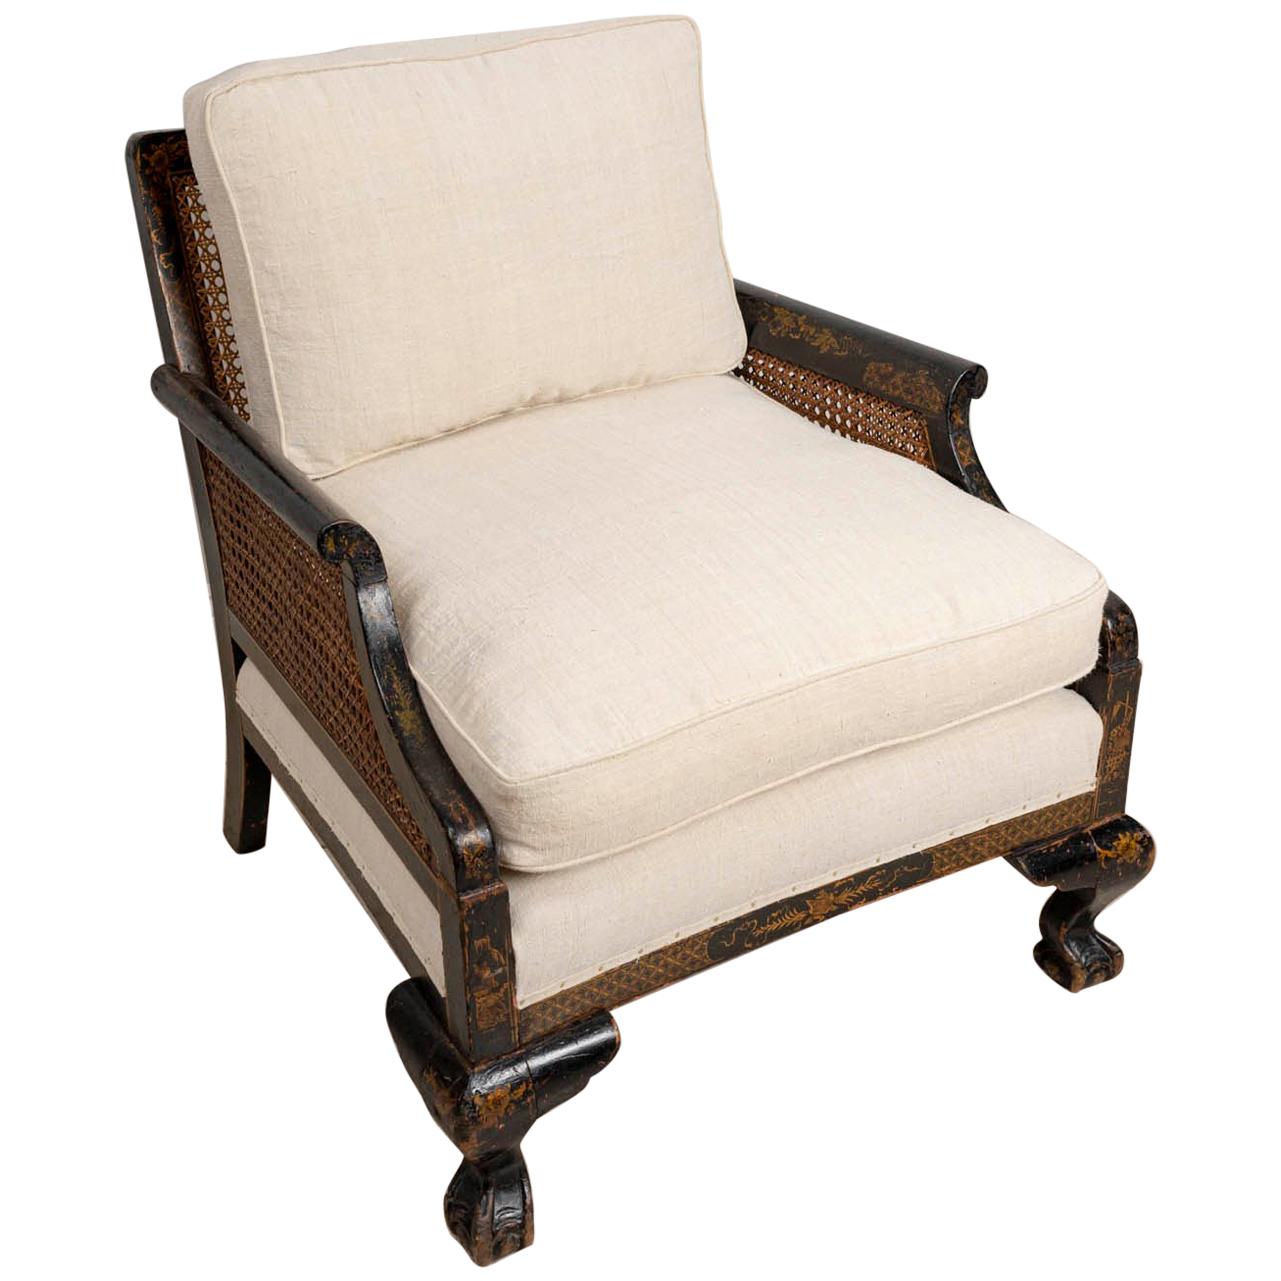 Late 19th Century English Chinoiserie Chair with Caned Sides and Back